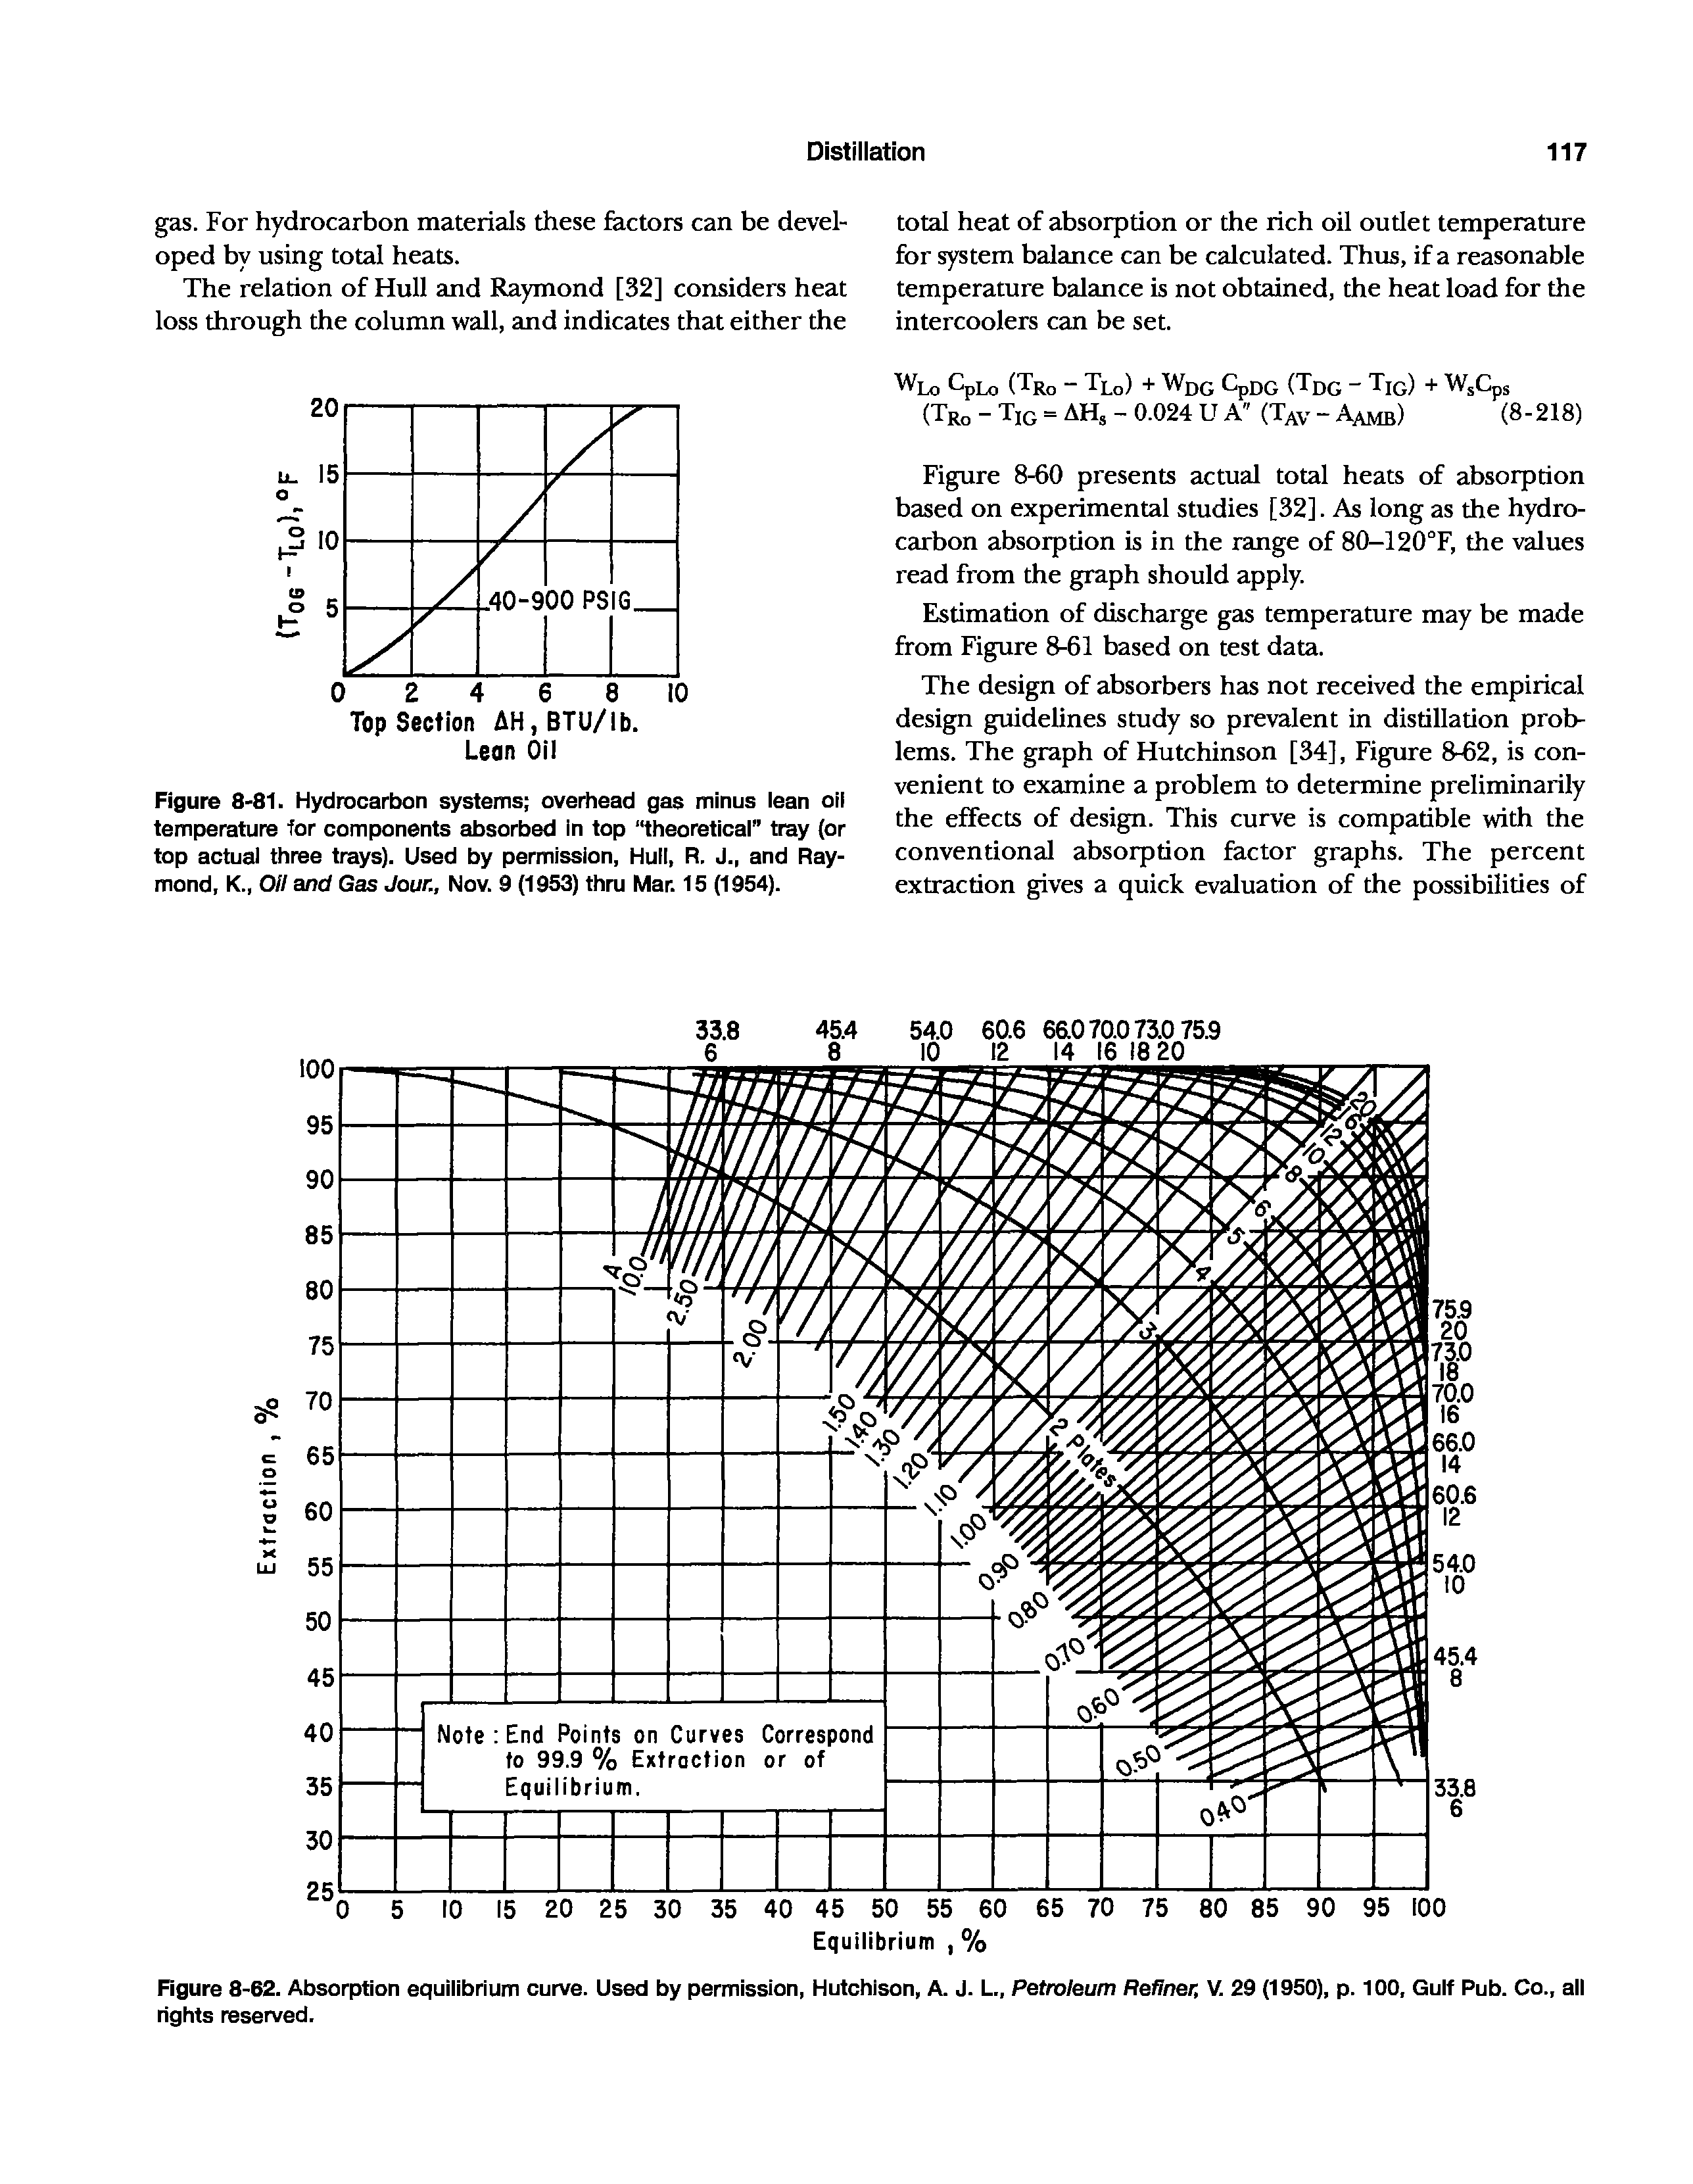 Figure 8-62. Absorption equilibrium curve. Used by permission, Hutchison, A. J. L., Petroleum Refiner, V. 29 (1950), p. 100, Gulf Pub. Co., all rights reserved.